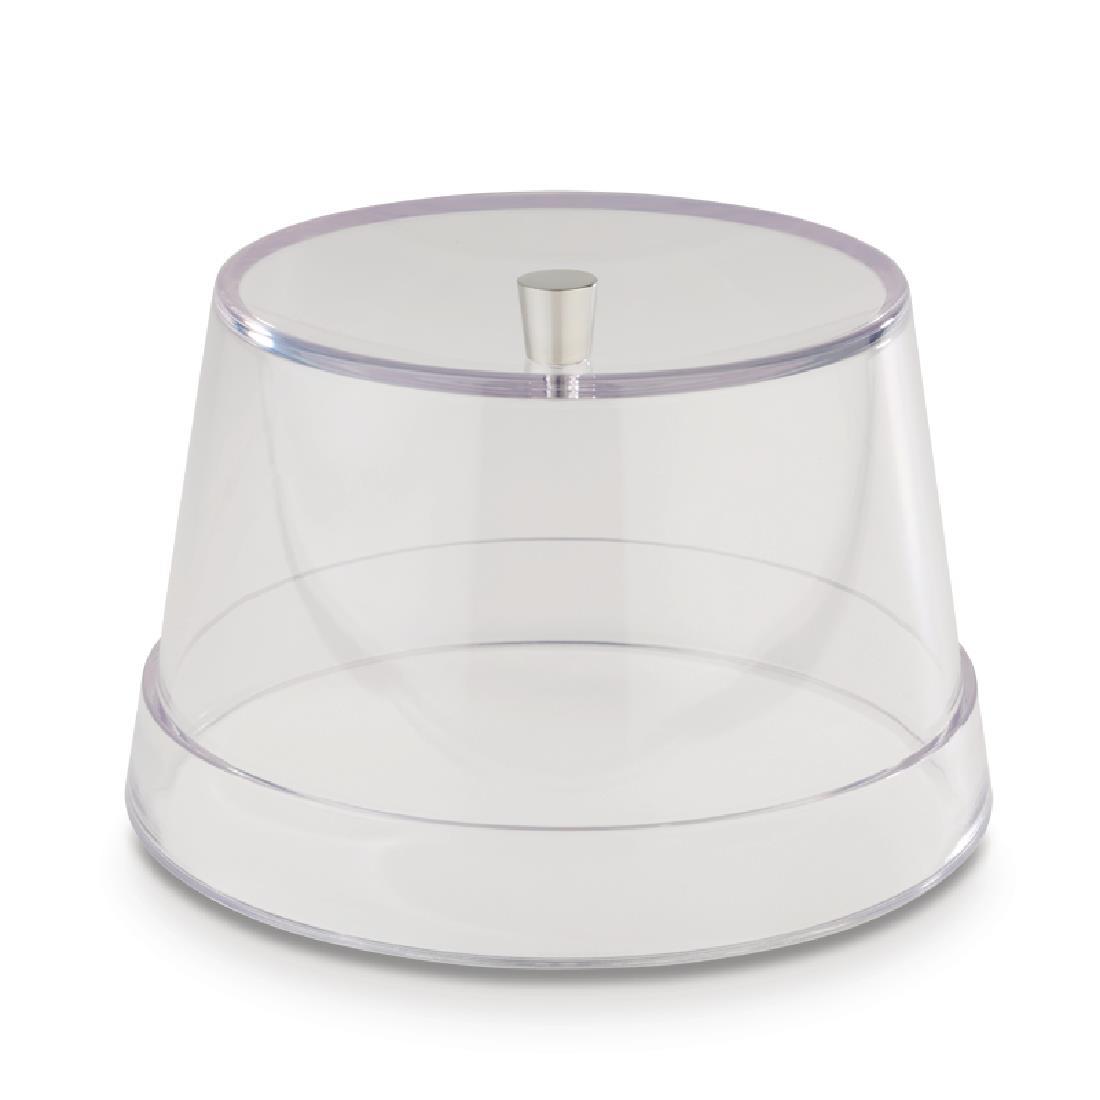 APS+ Bakery Tray Cover Clear 185mm - DE550  - 1